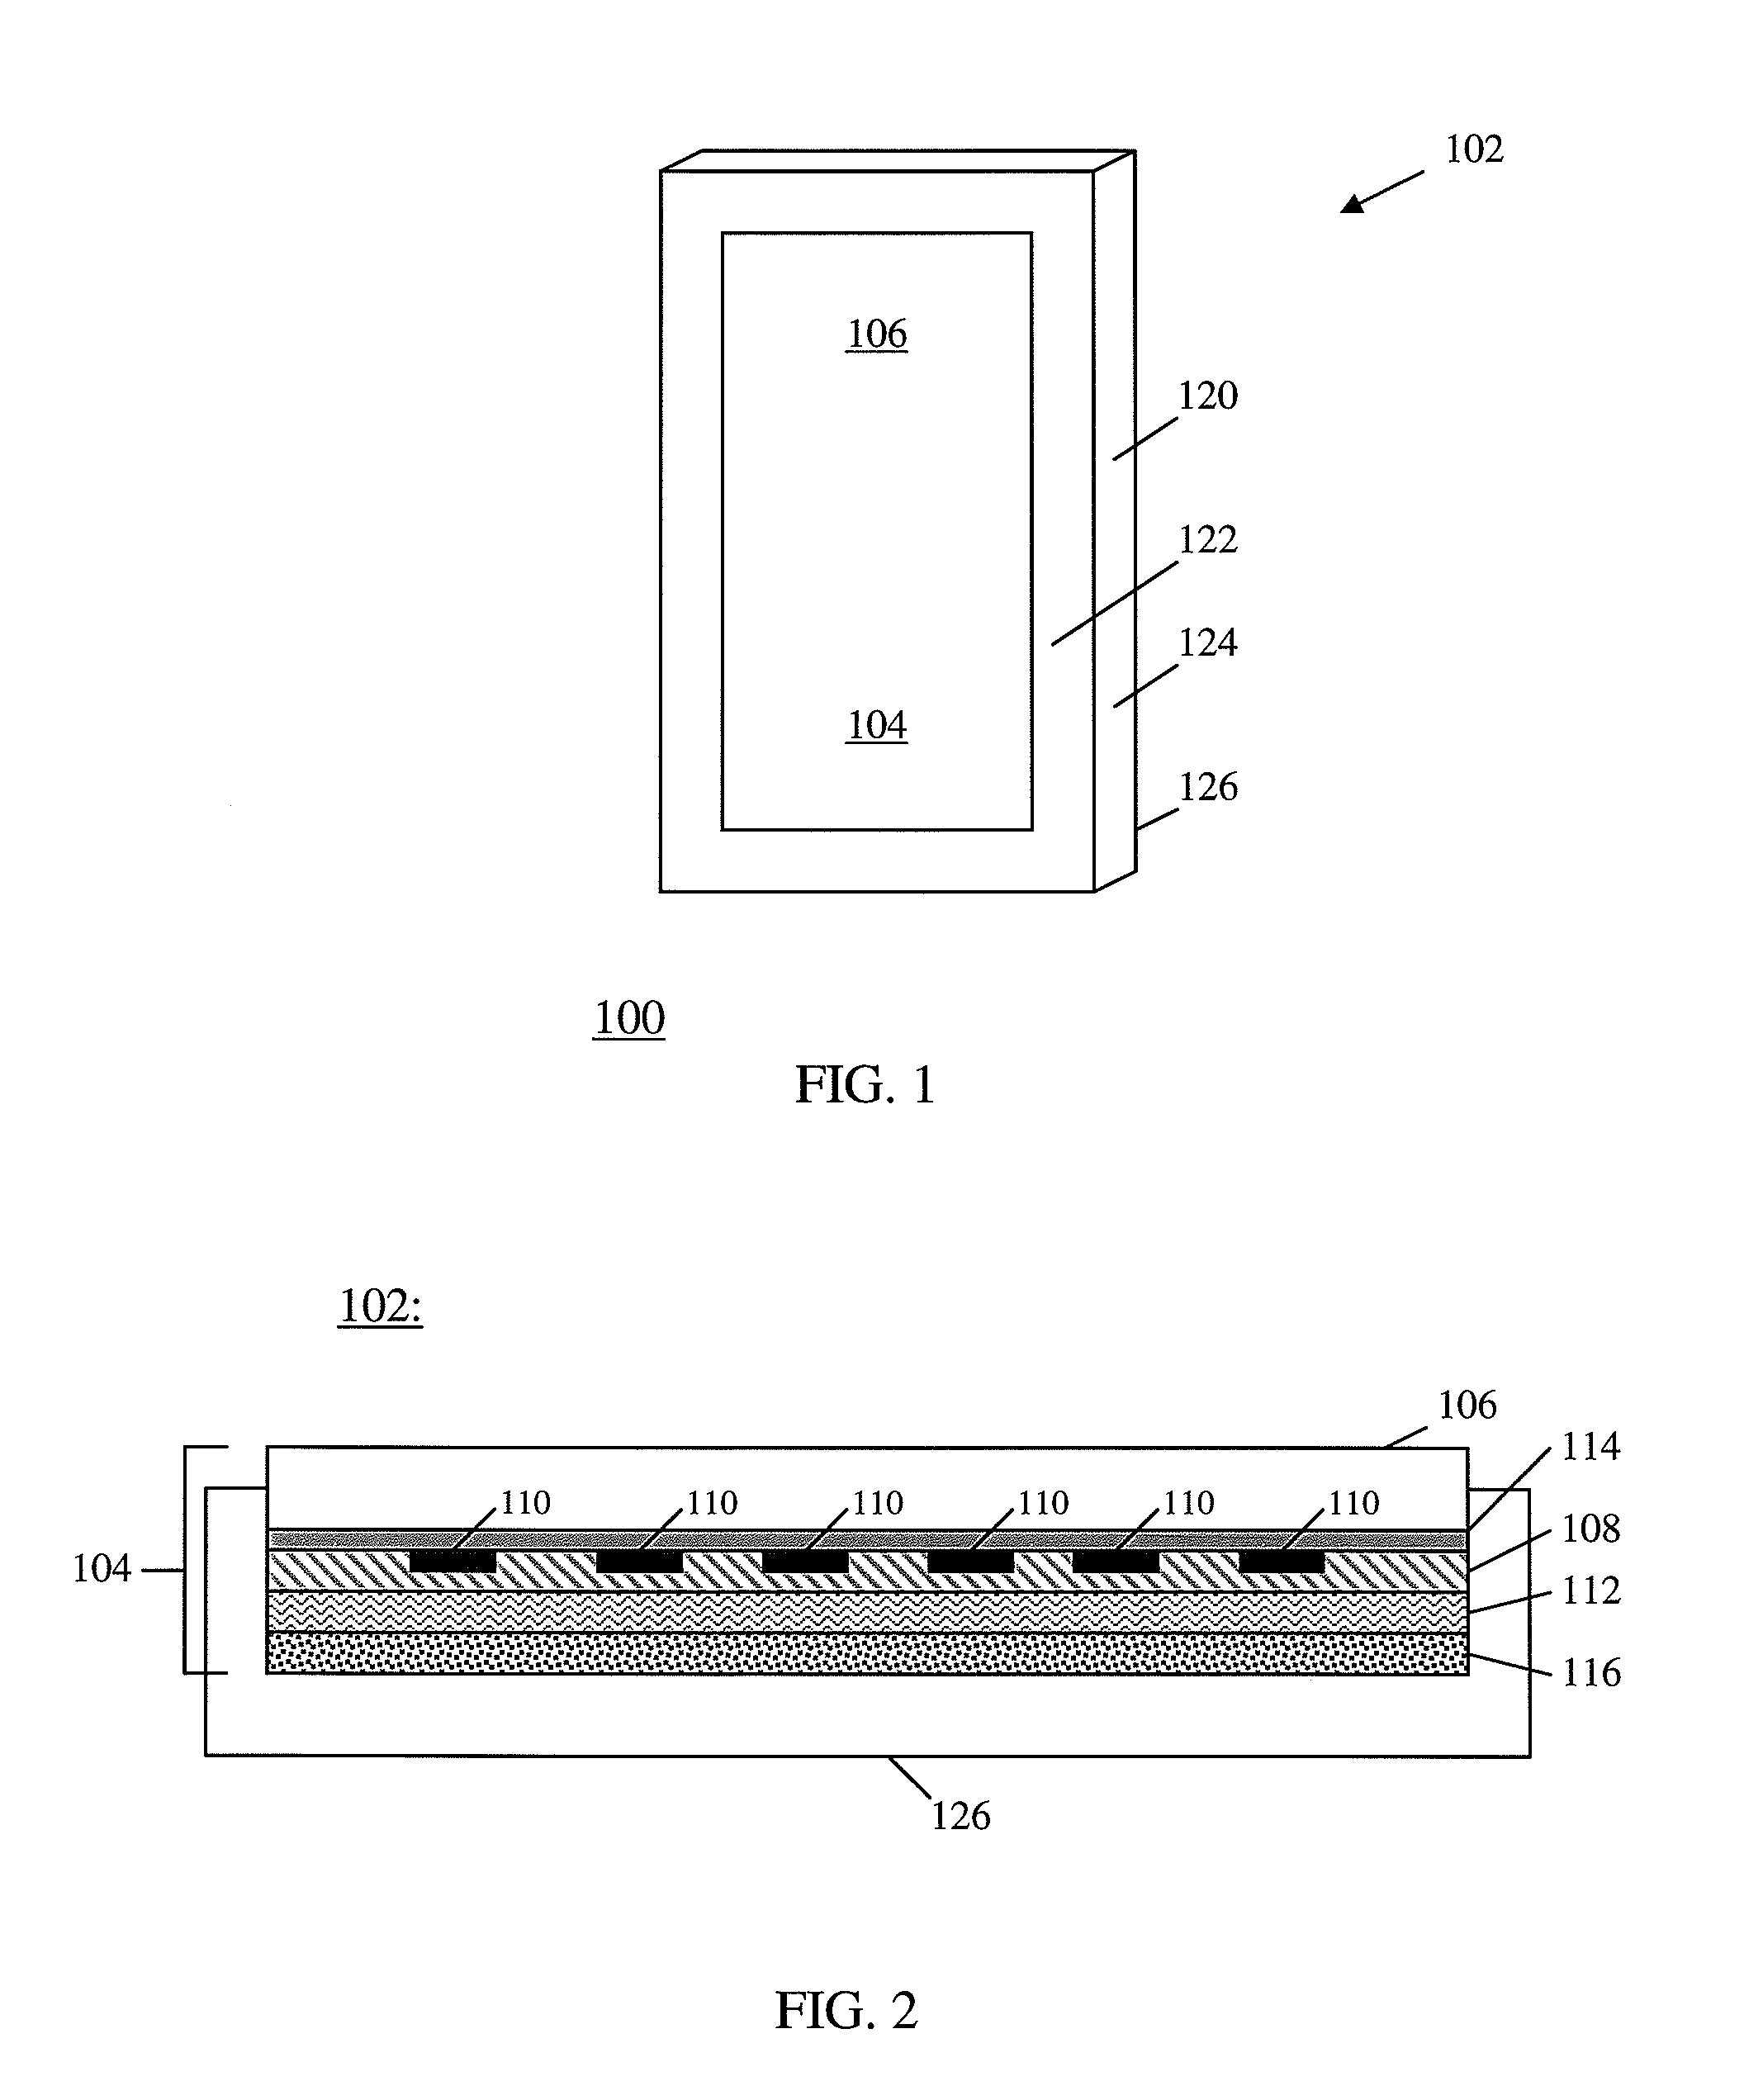 User computer device with temperature sensing capabilities and method of operating same